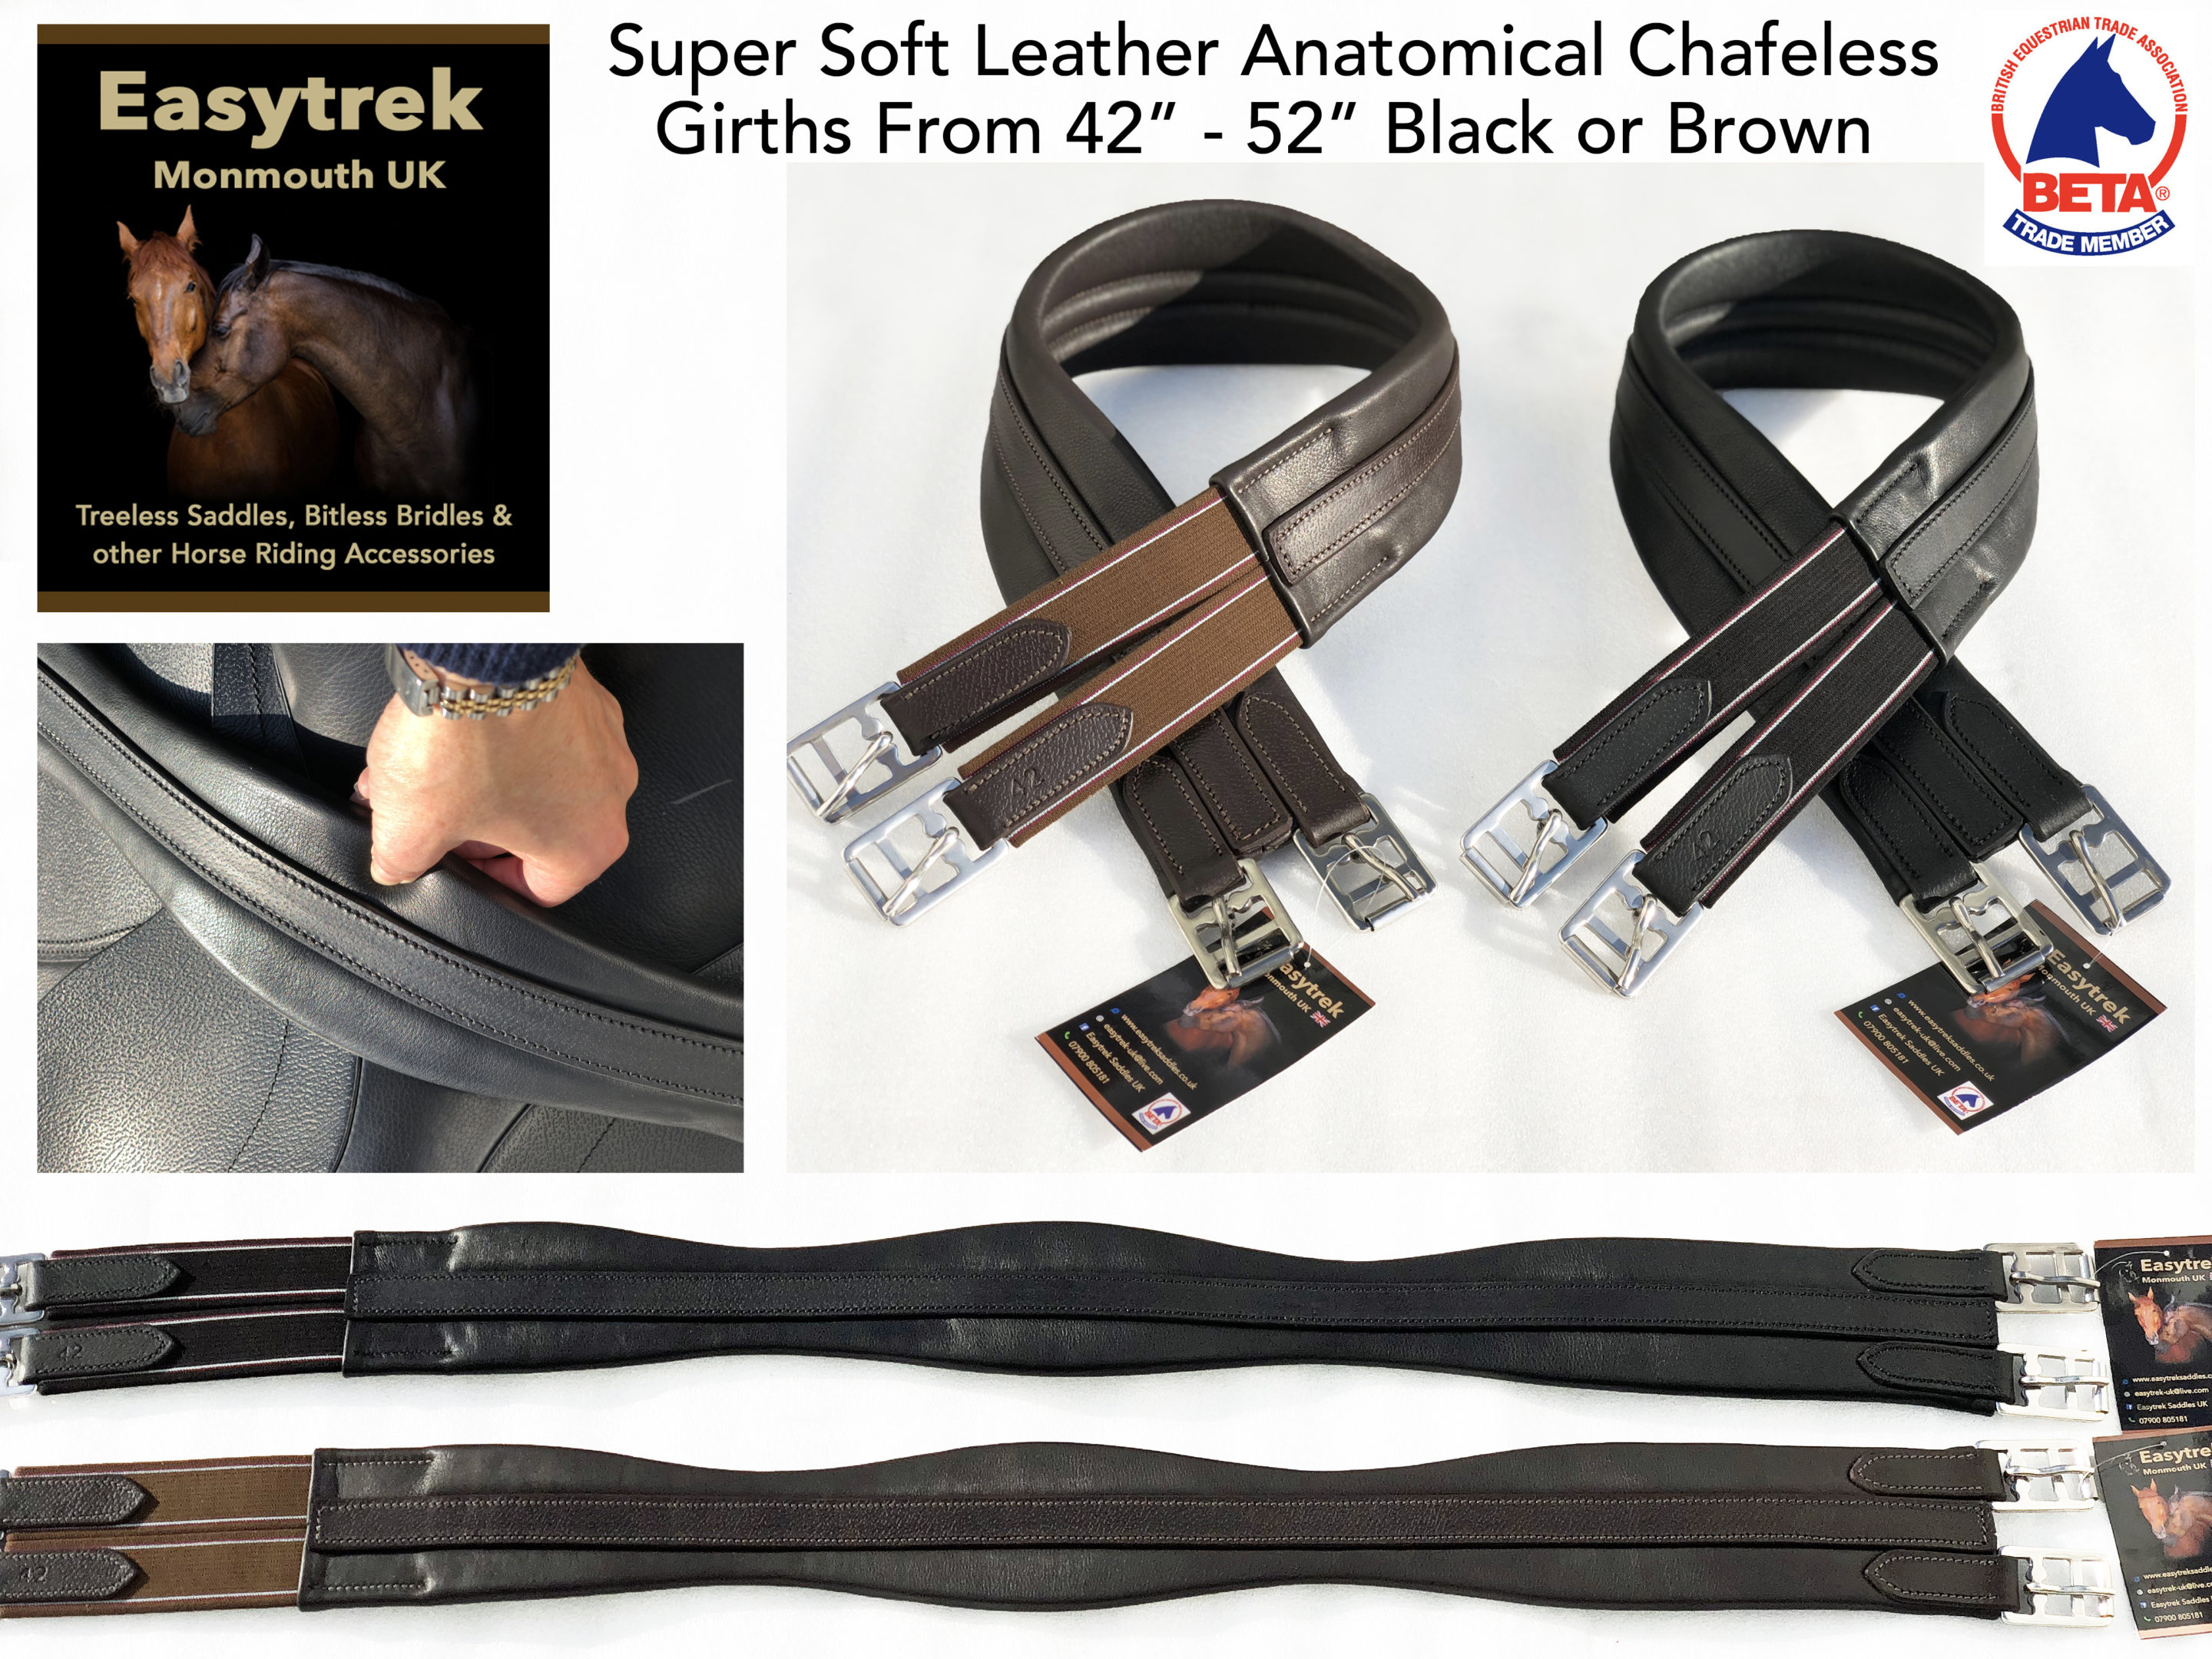 Easytrek fabulous quality super soft padded leather anatomical chafeless girth. 